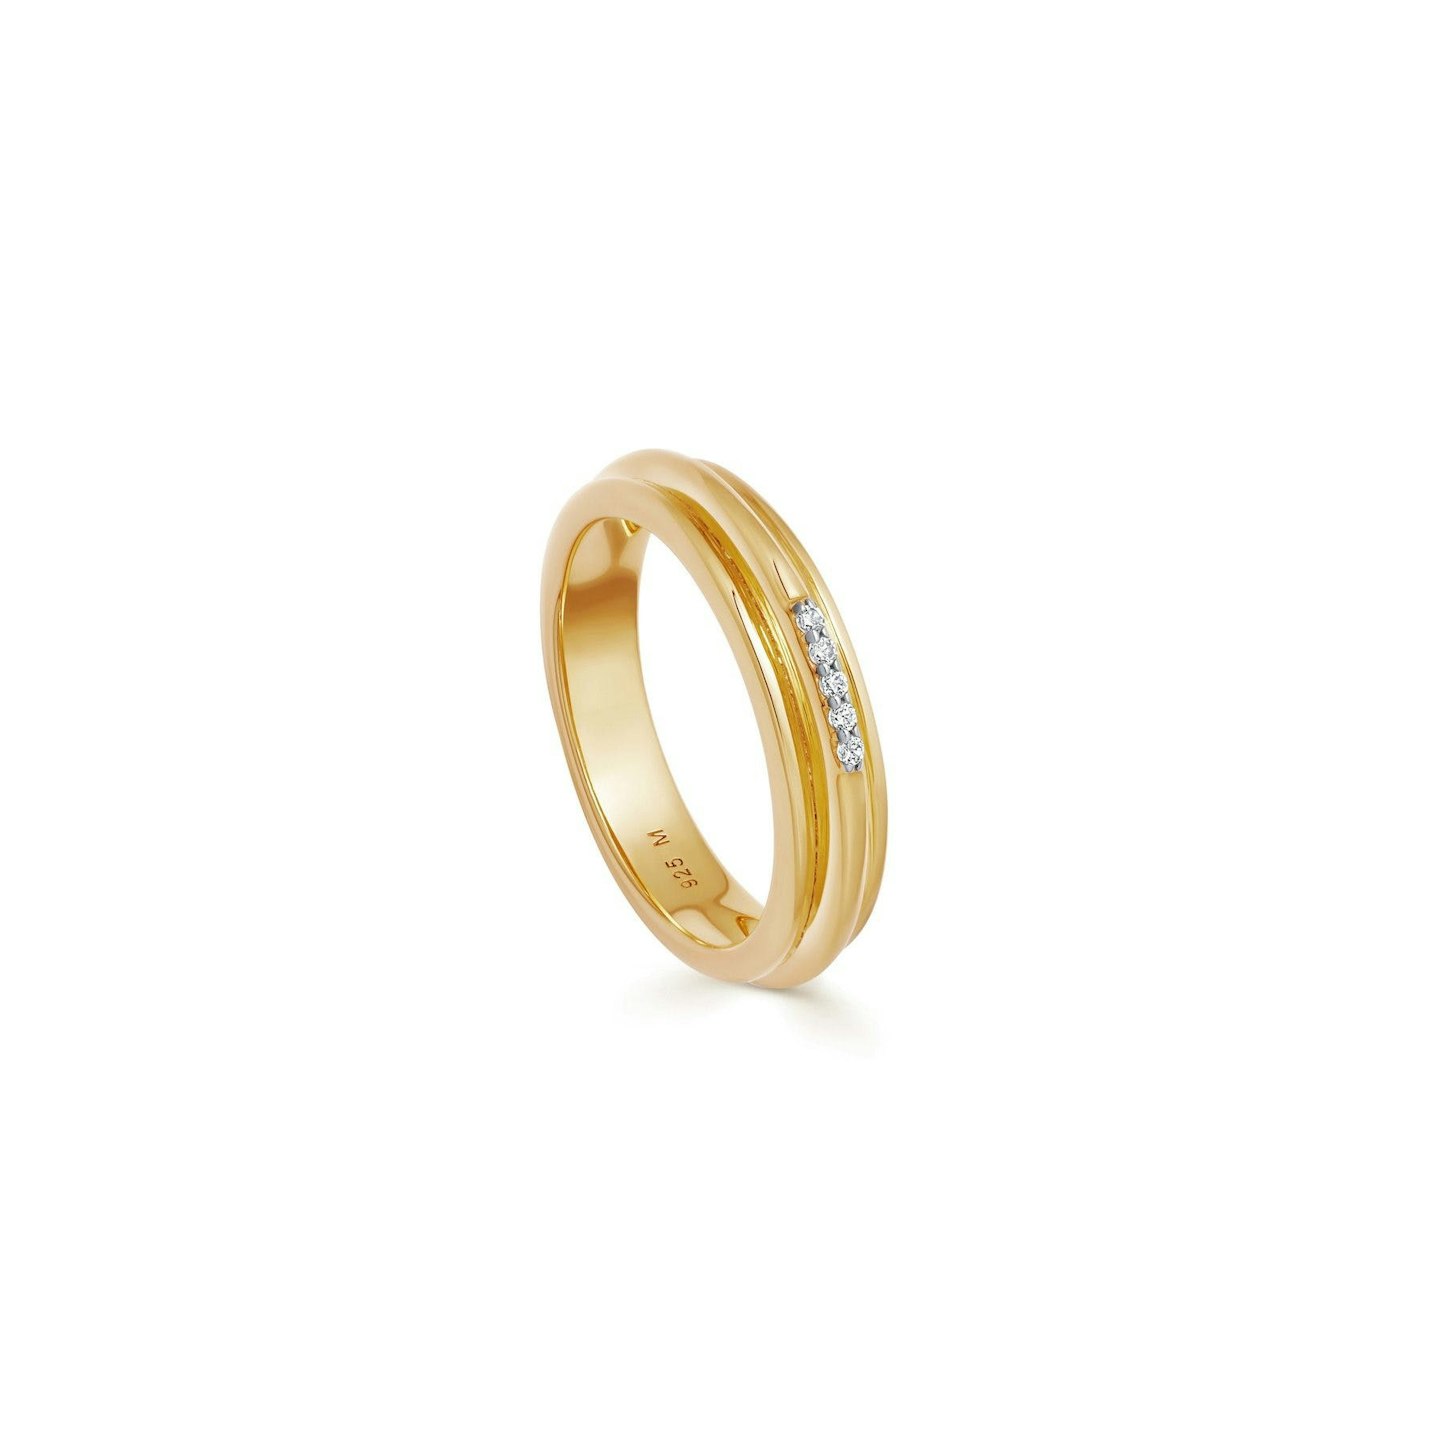 Missoma, Lucy Williams Gold Pave Ridge Ring